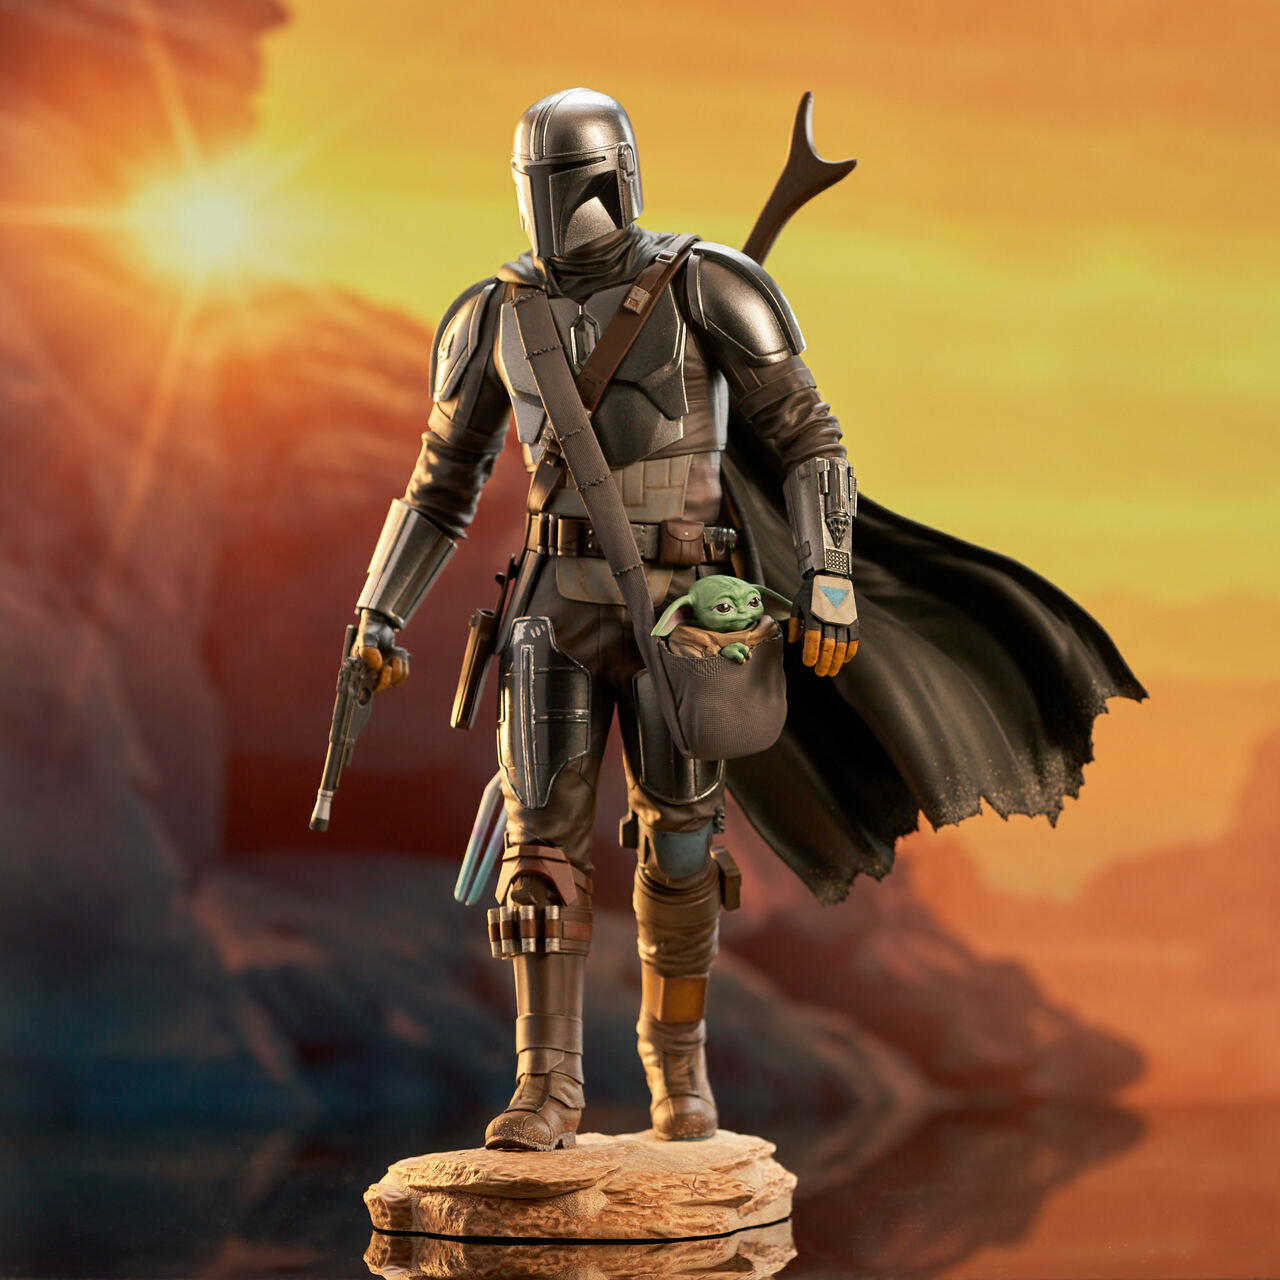 Star Wars Mandalorian with Child Premier Collection Statue Hasbro